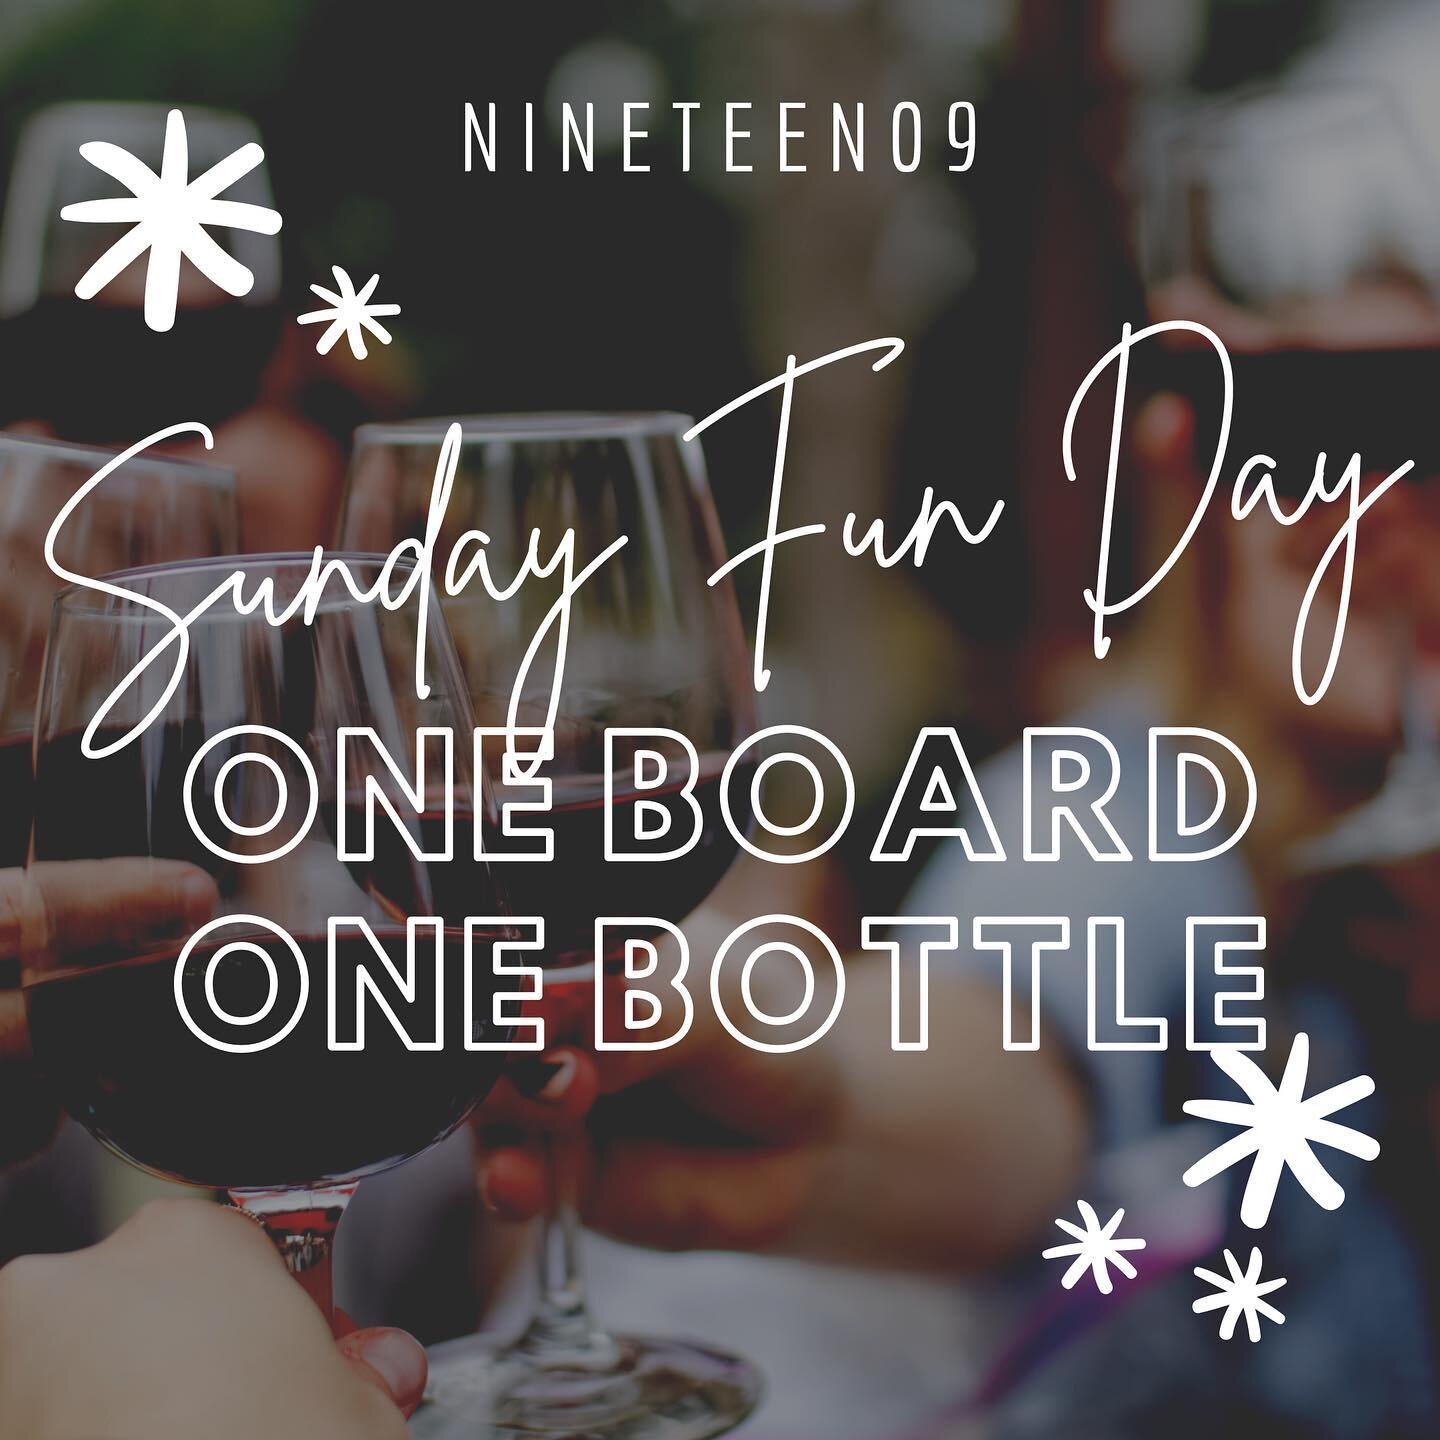 Sunday Fun Day Board &amp; Bottle special!  Choose from one of our select wines and either a Wisconsinite or Simple Start charcuterie board for just $30.  Perfect date day! #sundayfunday #sundayboardandbottle #boardandbottle #boardandbottlespecial #s